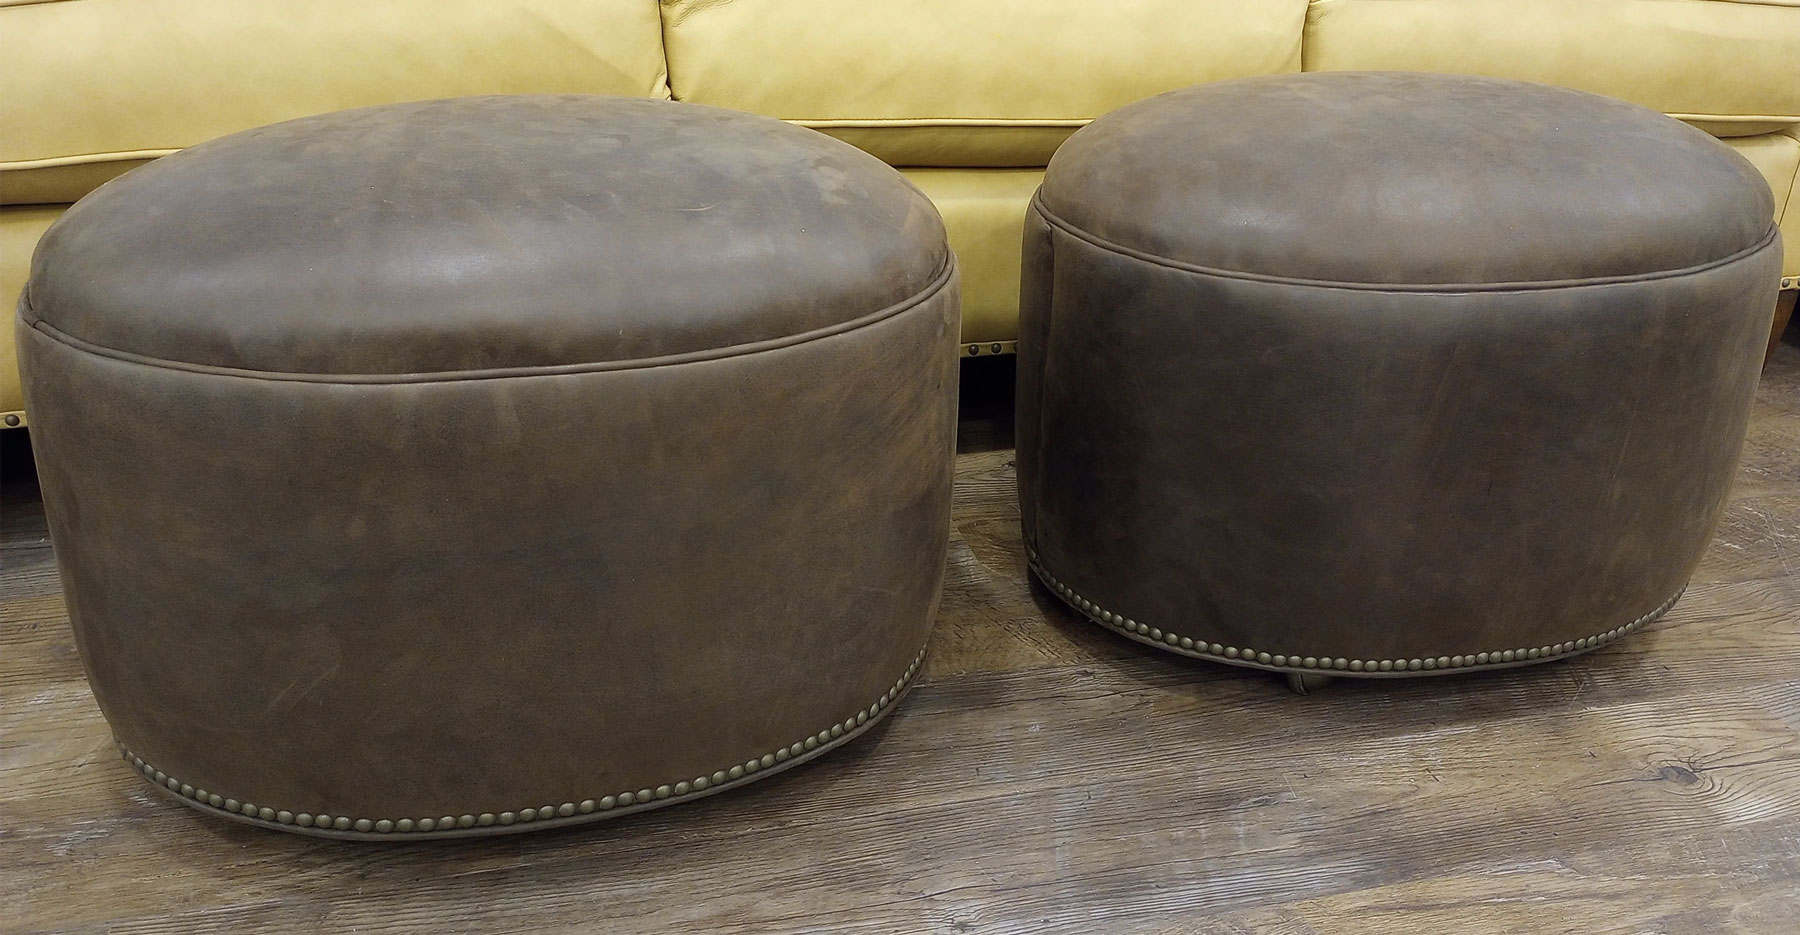 (2) Our House 733-C Ellipsis Caster Bunching Ottoman in Aged Cigar Leather